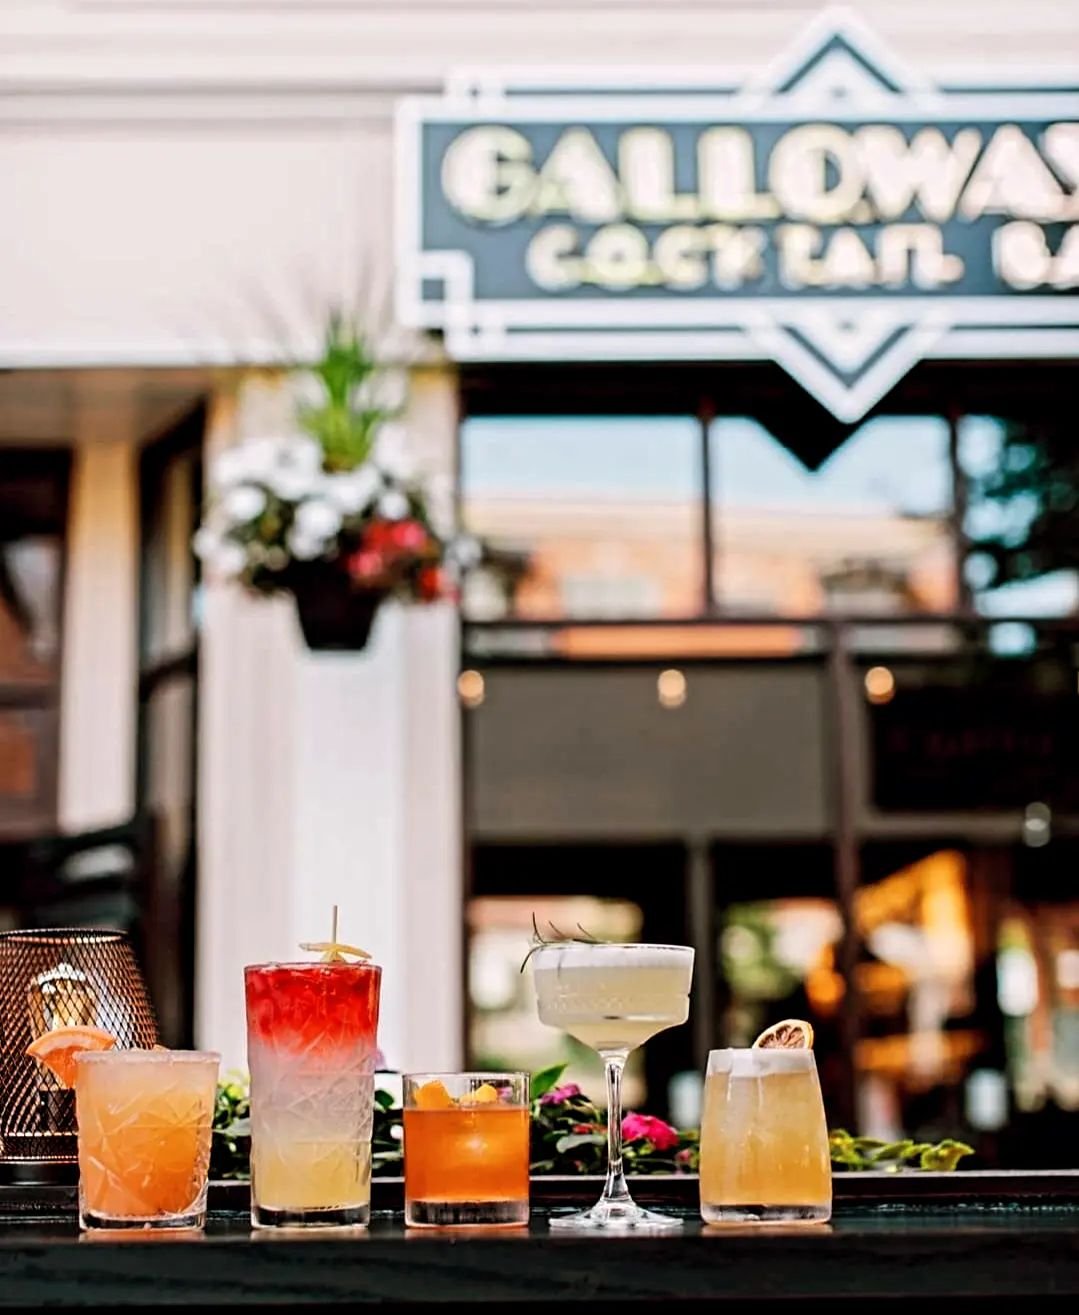 There are still a couple seats available for tonight's Cocktail Critics event - snag them now!

Five house crafted cocktails paired with tasty bites
Tonight: 5:30pm to 7:30pm
$80/person

Hosted by Galloway's Bartender, Garrett Ciaramella!

For reserv